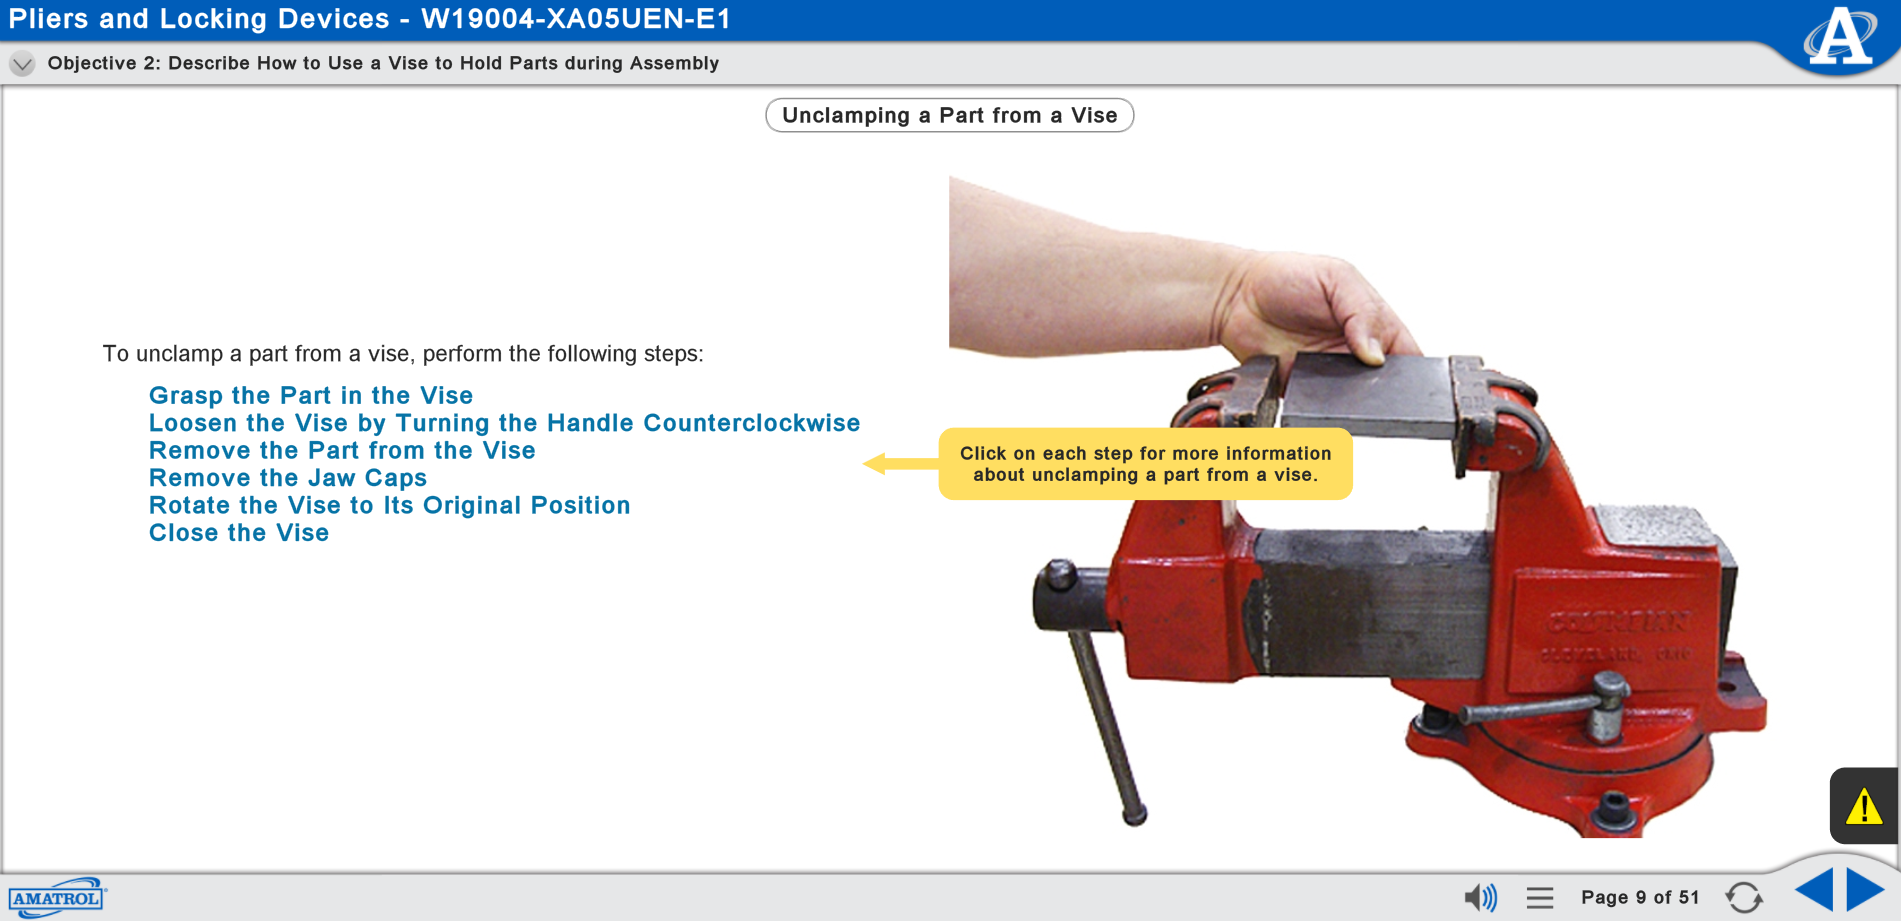 Mechanical Fabrication 1 Learning System (950-MPF1) eLearning Curriculum Sample